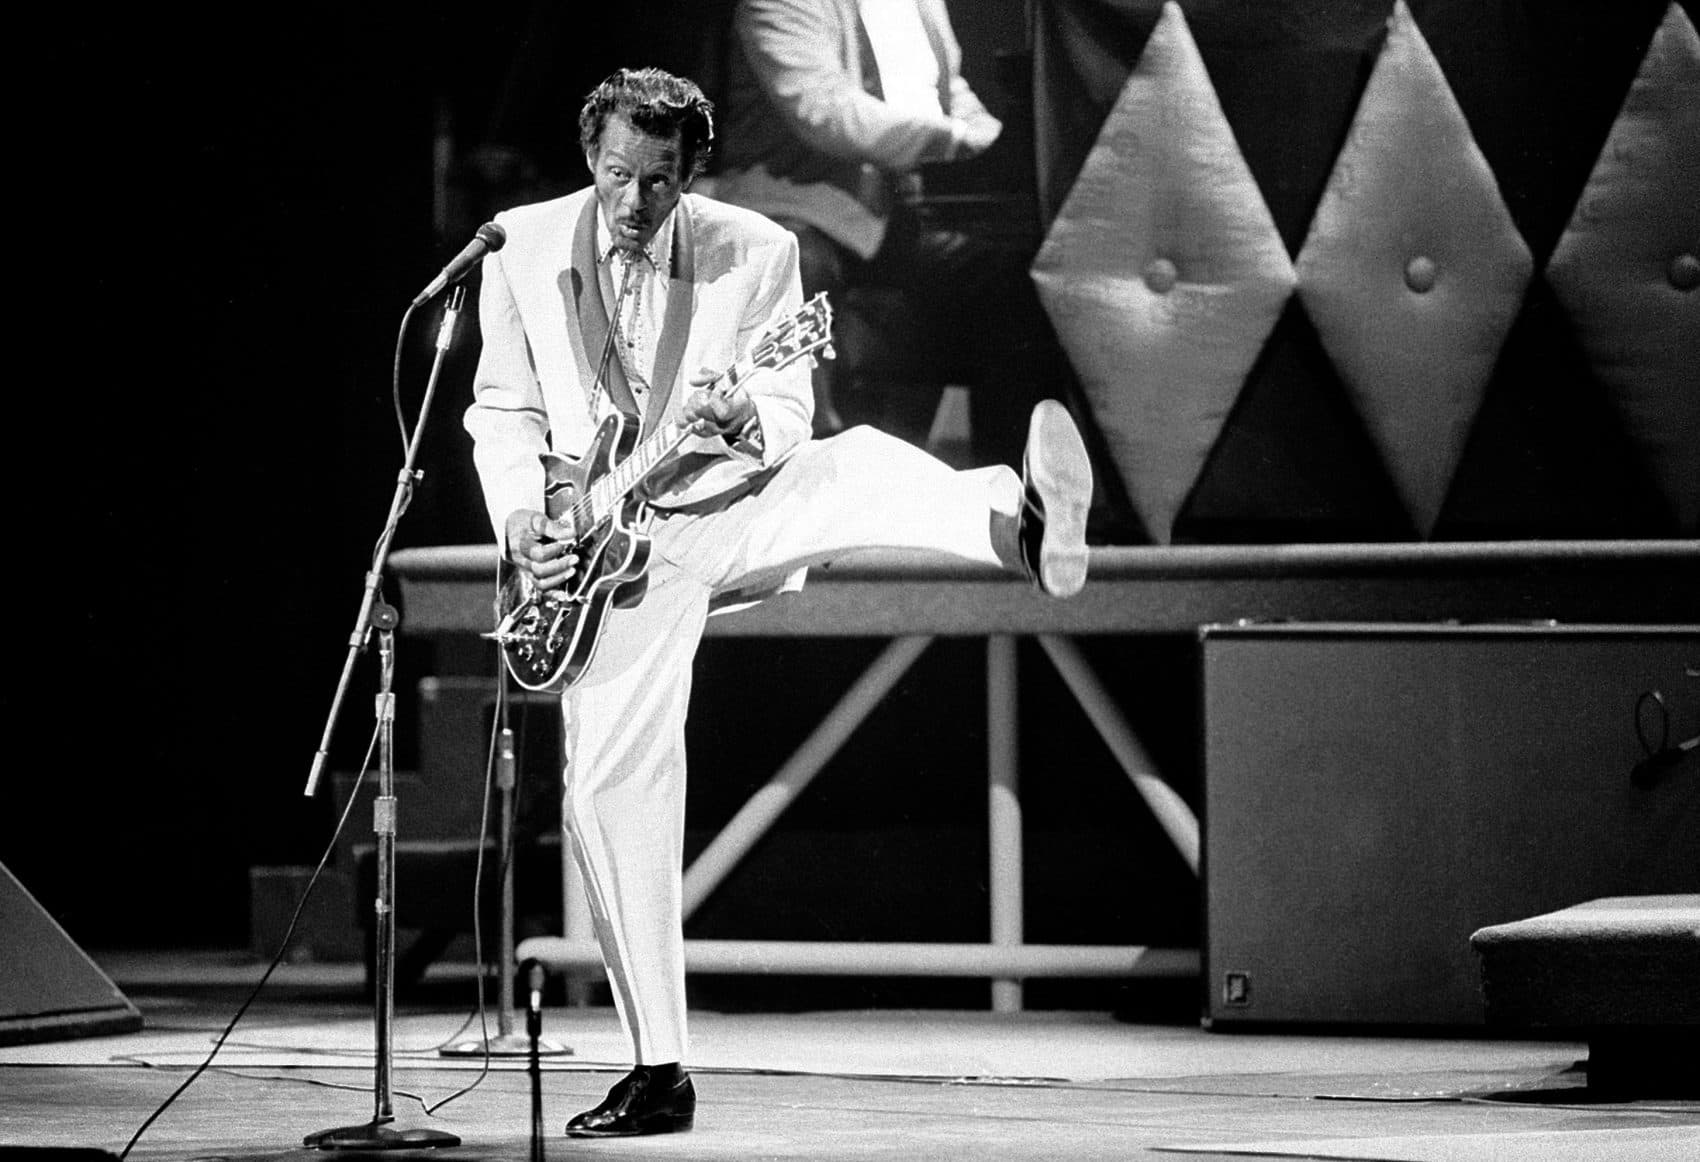 In this Oct. 17, 1986 file photo, Chuck Berry performs during a concert celebration for his 60th birthday at the Fox Theatre in St. Louis, Mo. On Saturday, March 18, 2017, police in Missouri said Berry died at the age of 90. (James A. Finley/AP)